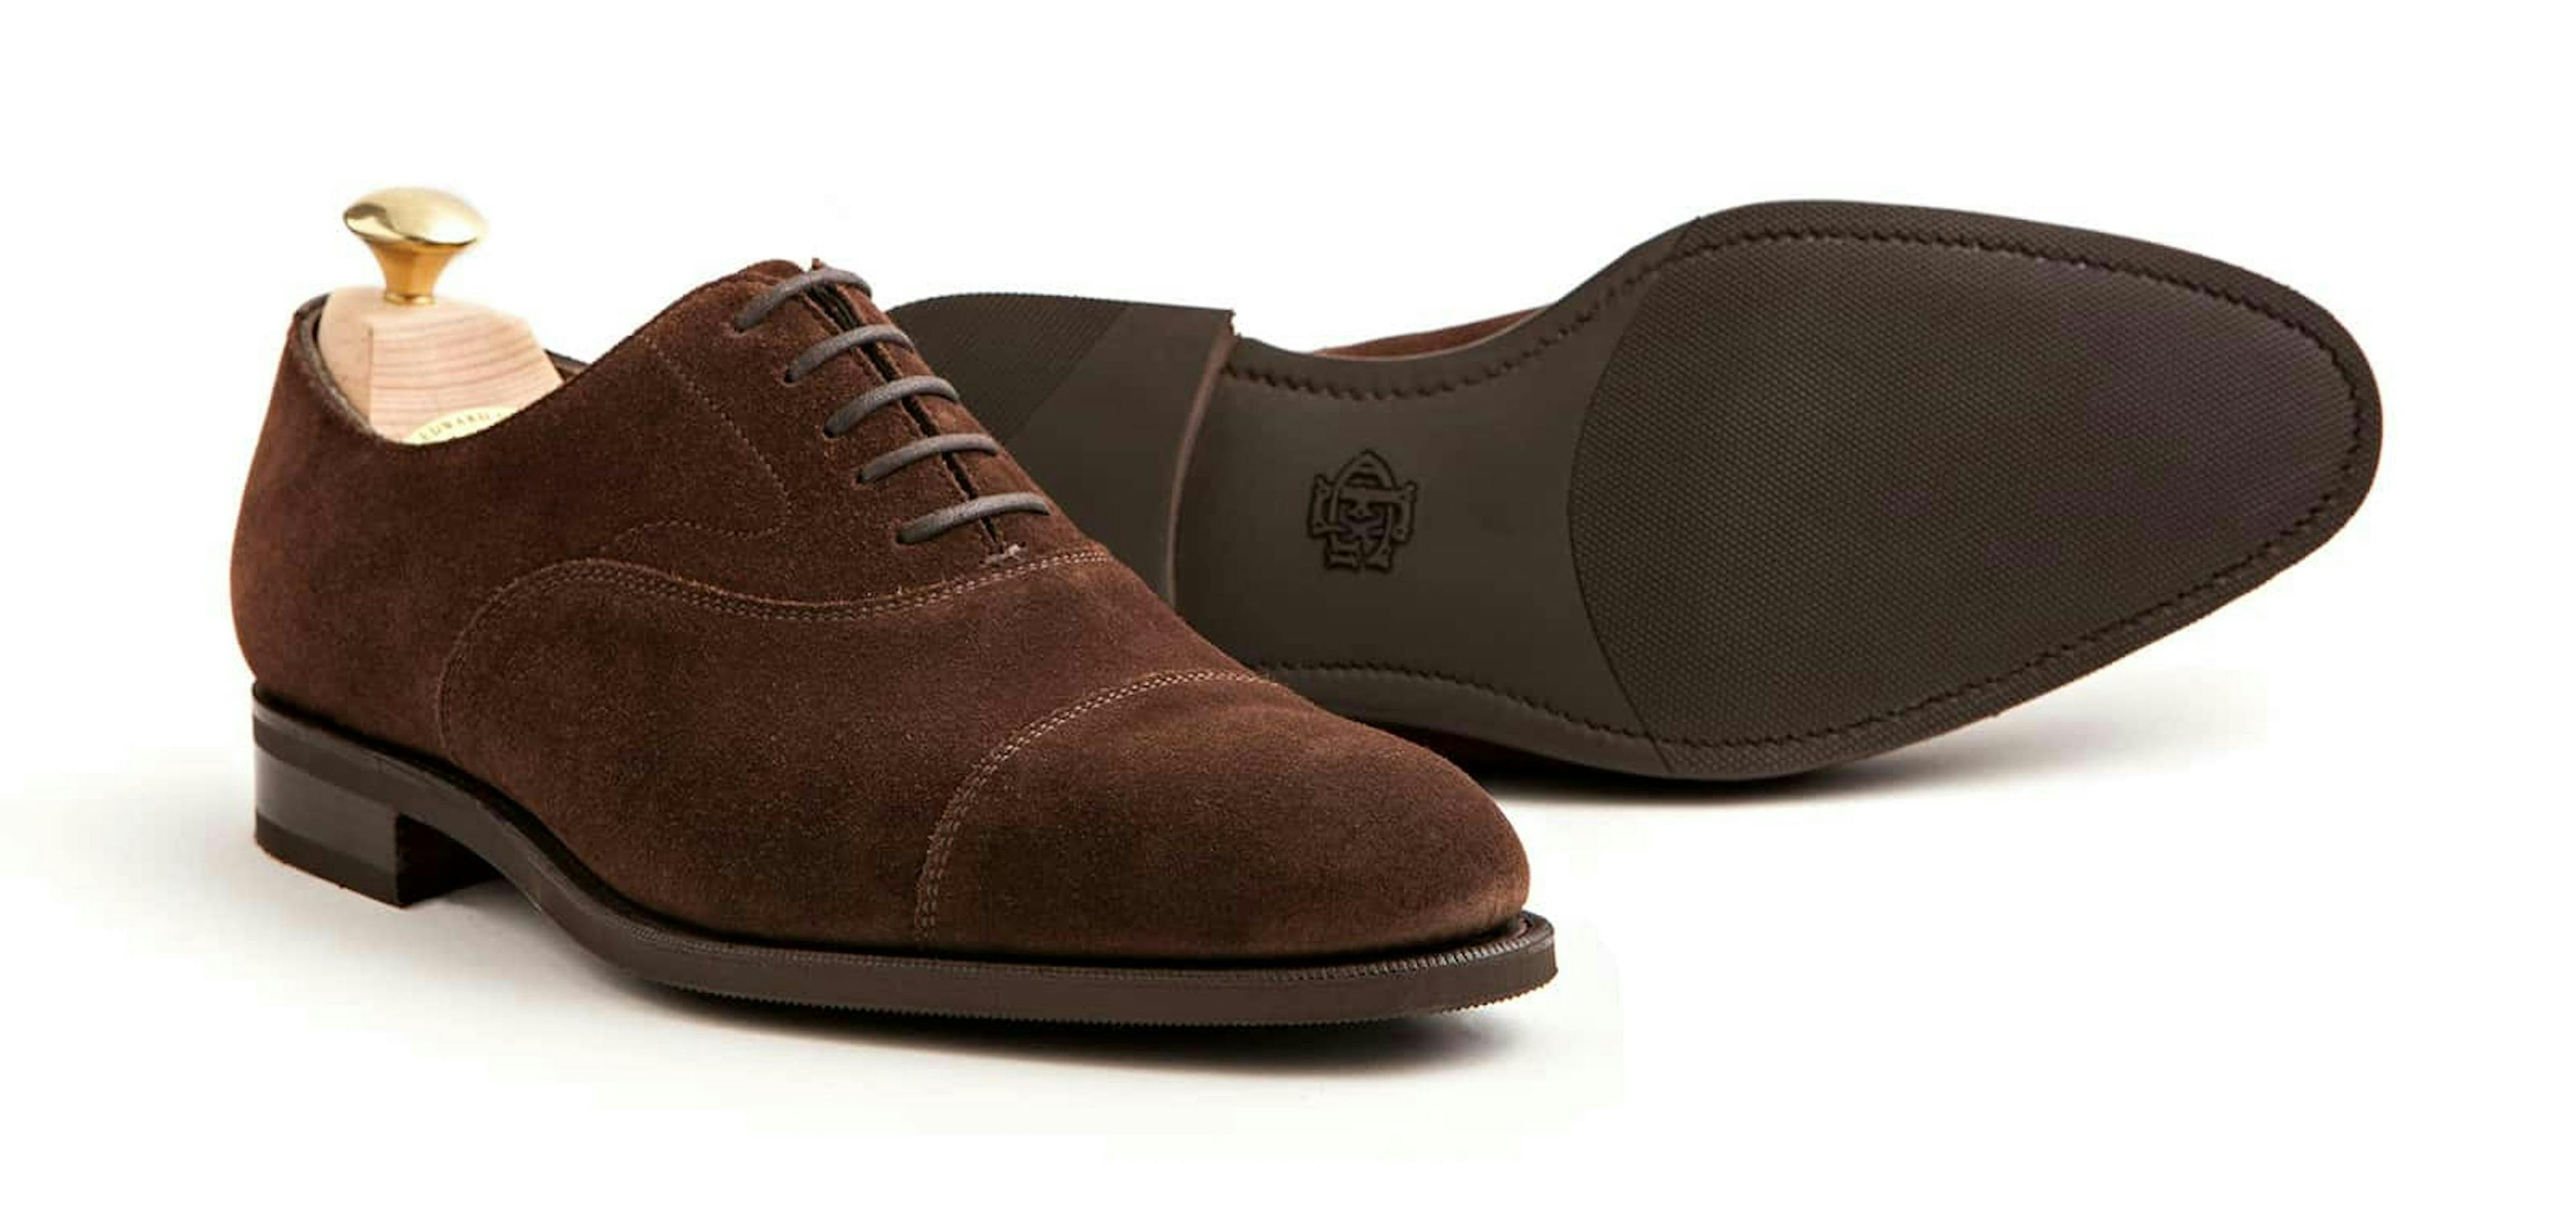 An Edward Green Chelsea in mink suede, with a view of its R1 rubber soles.